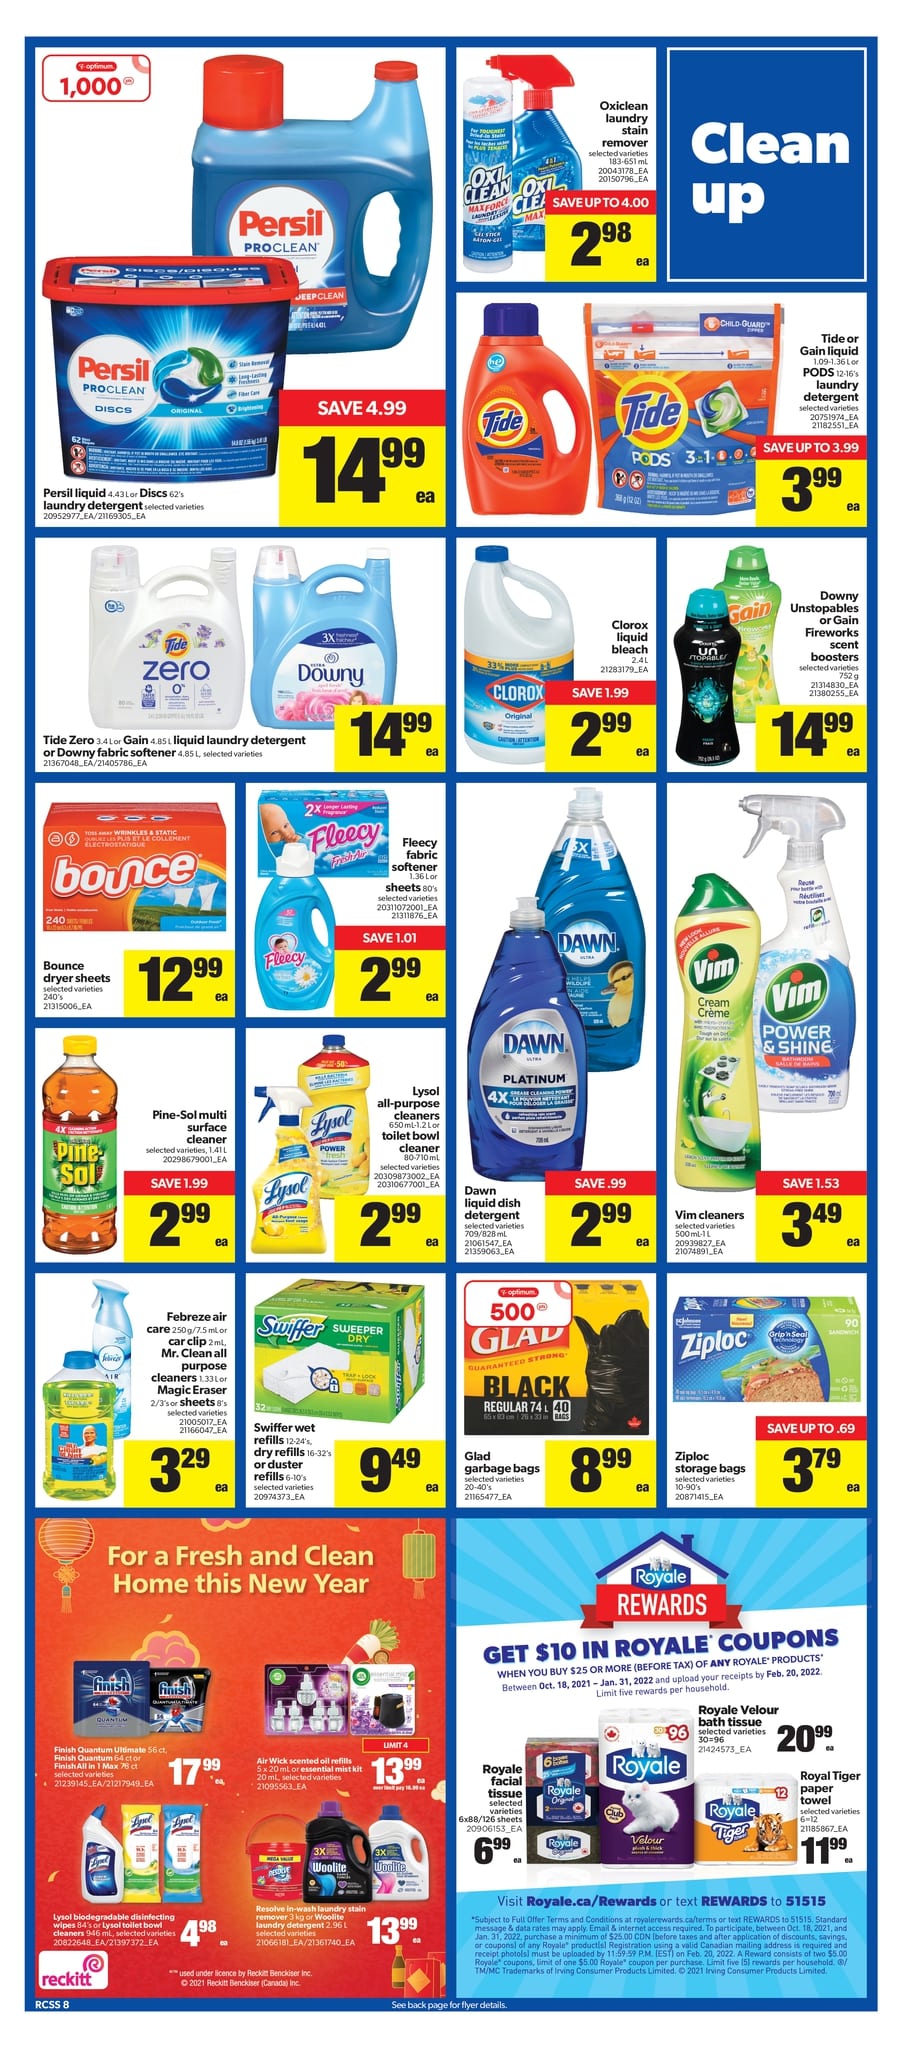 Real Canadian Superstore Ontario - Weekly Flyer Specials - Page 8